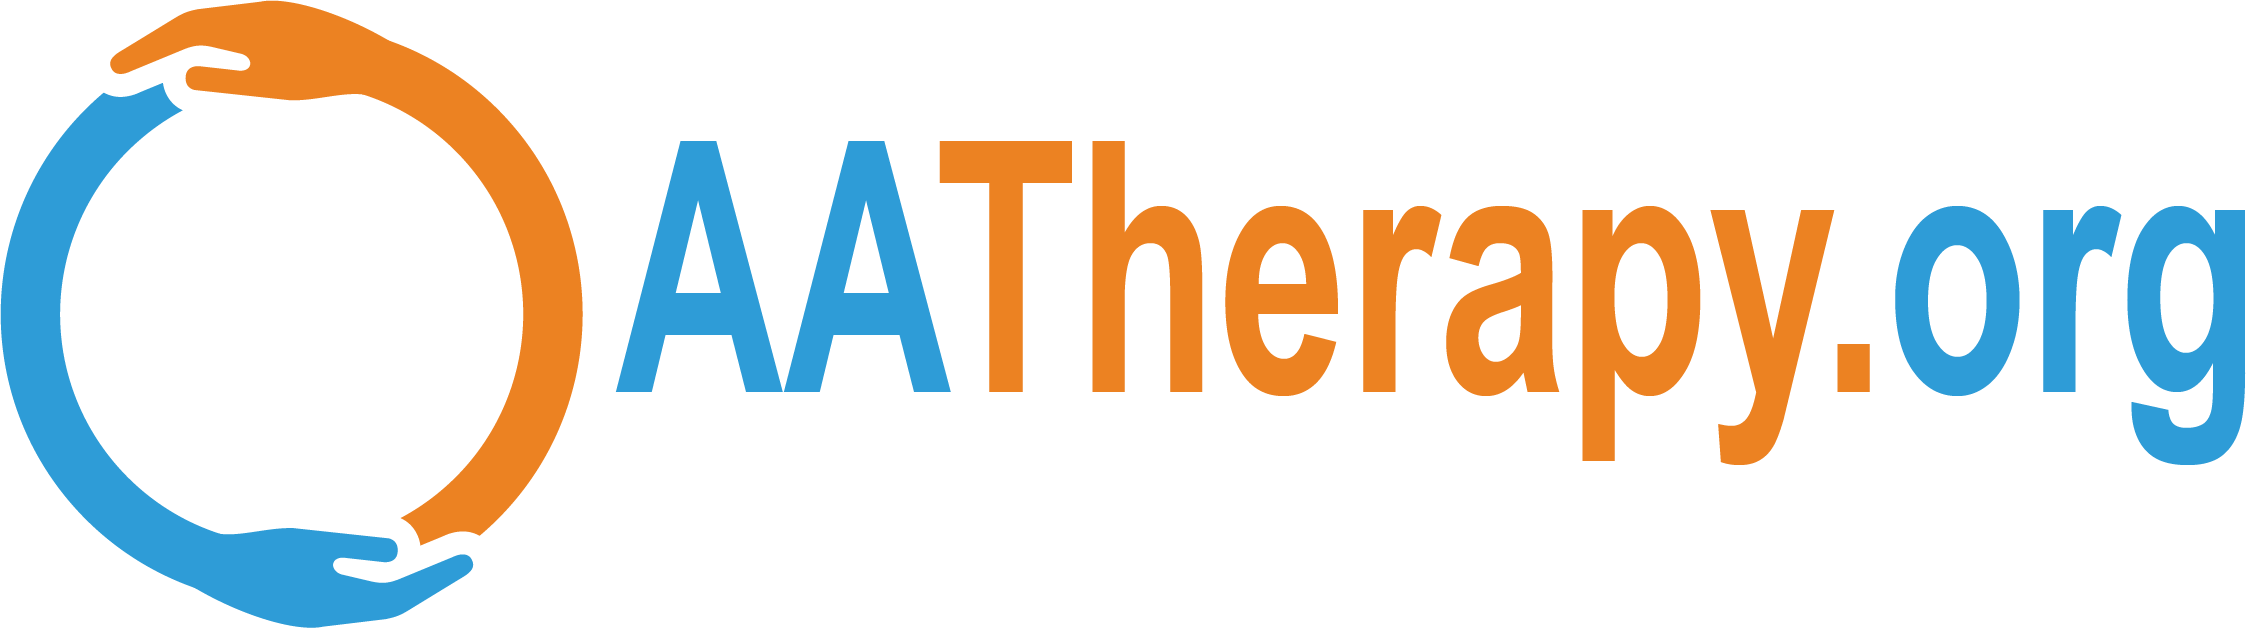 American Assoc. of Animal-Assisted Therapy